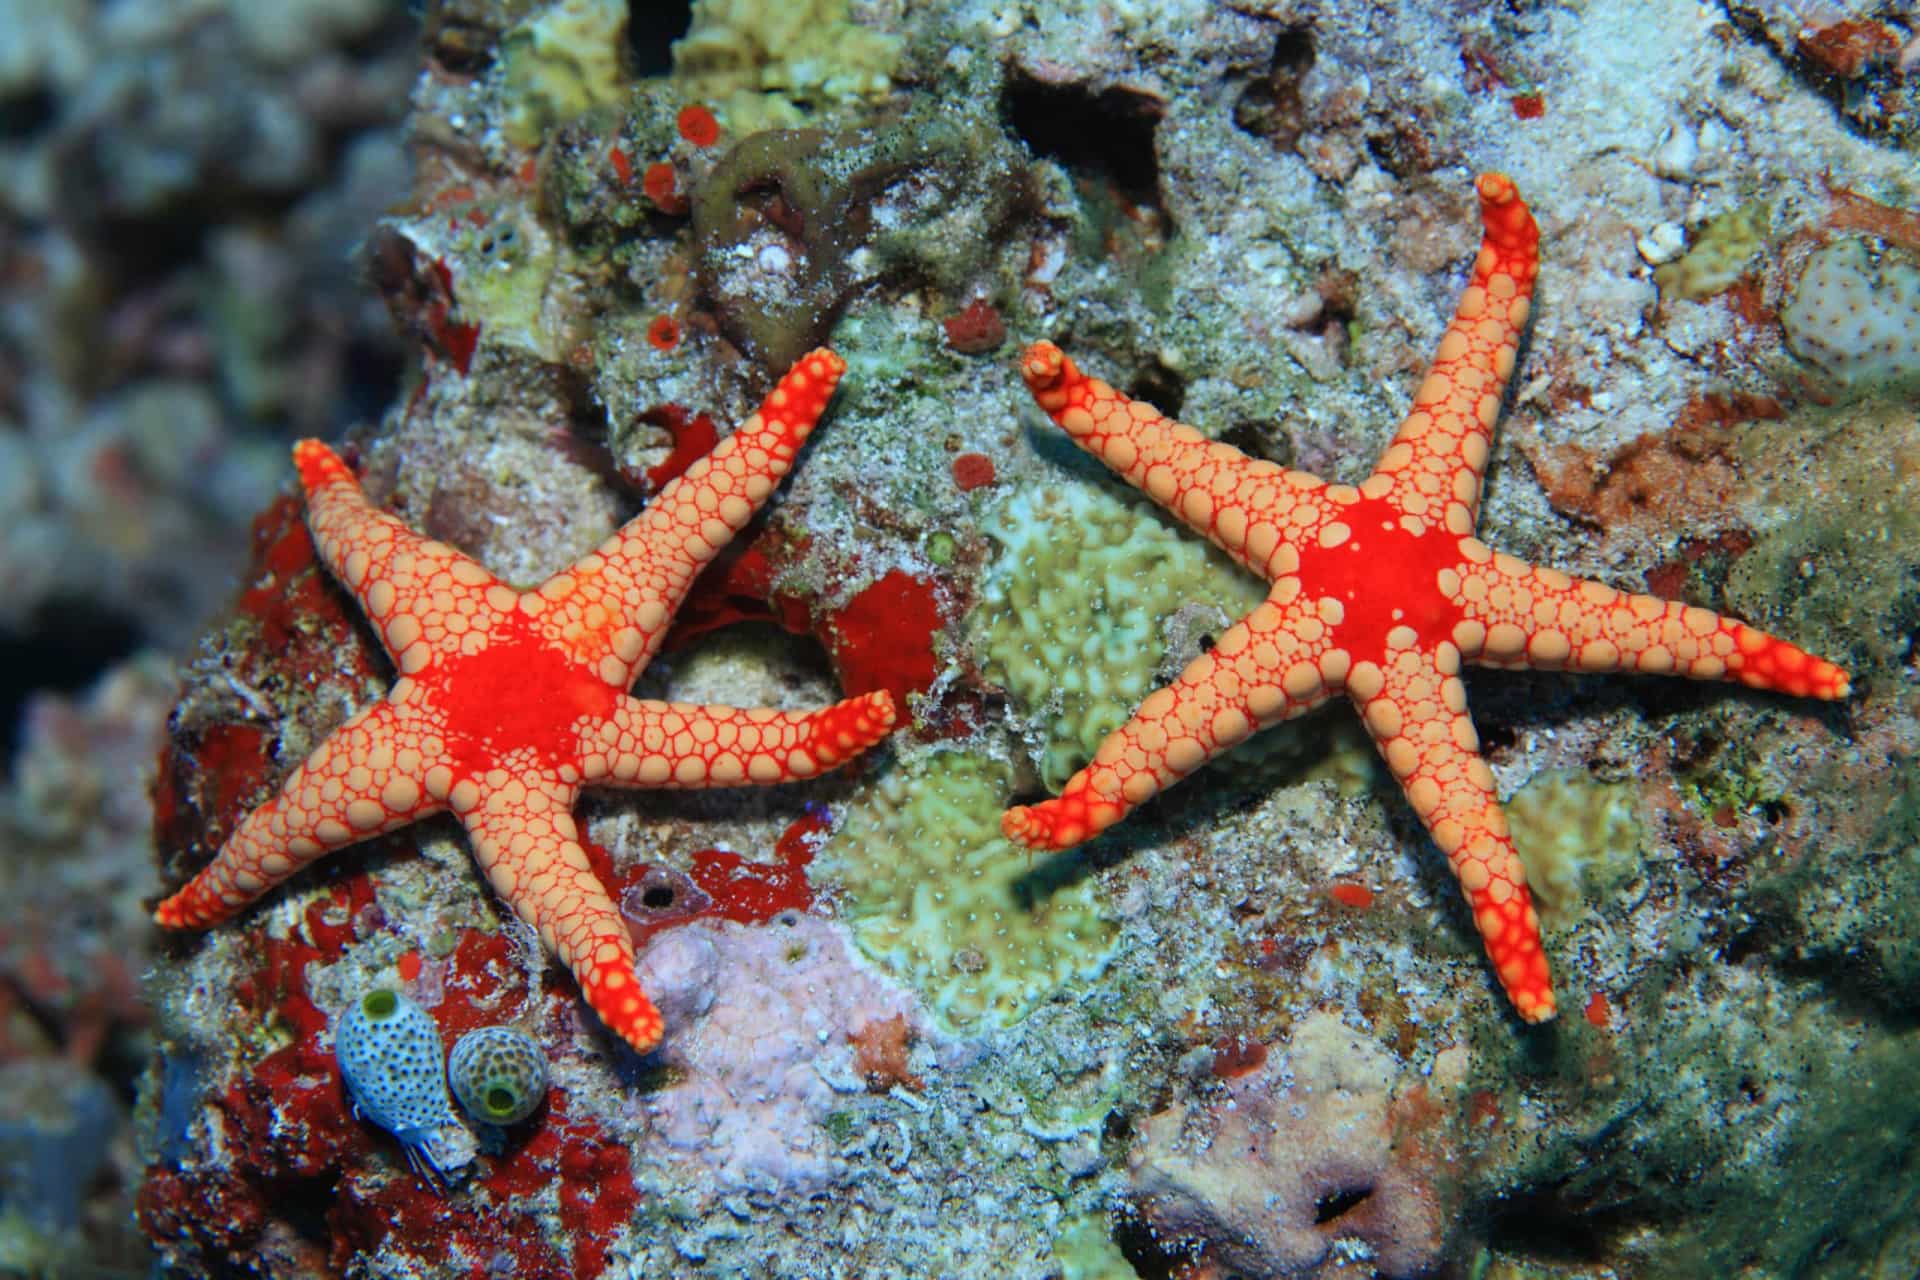 <p>These beautiful starfish adorn the Maldivian coral reefs. Along with sea cucumbers, sand dollars, and the like, the Maldives has over 80 types of echinoderms to ogle at.</p>